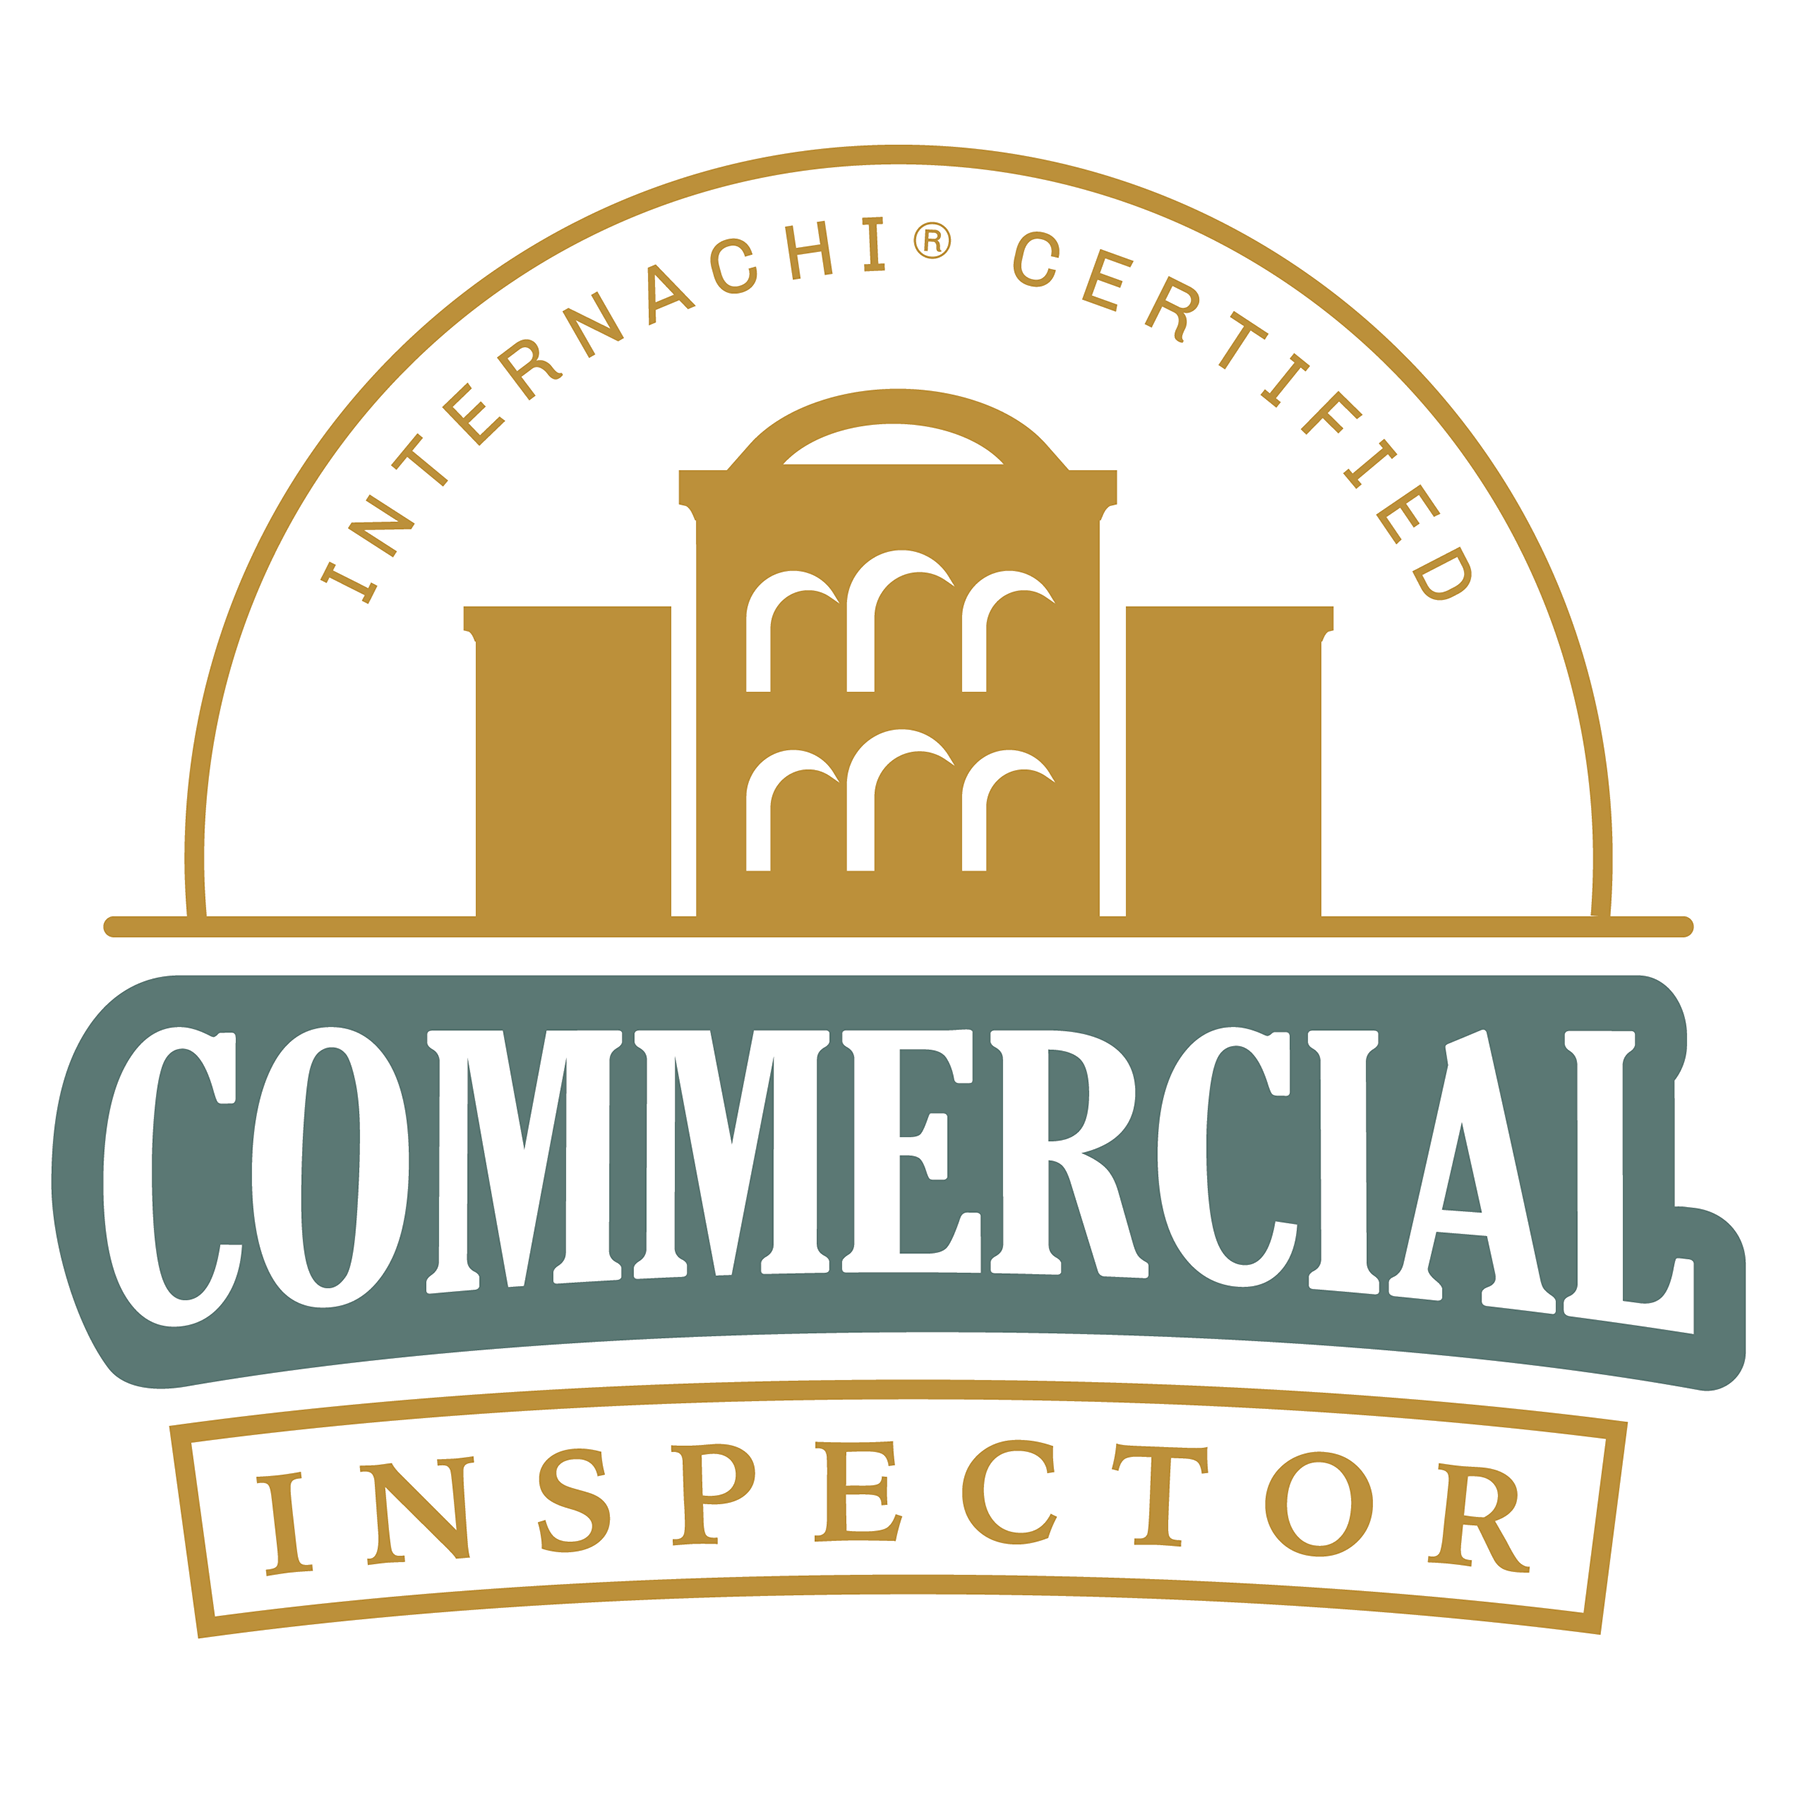 Commercial Inspection, home inspection florida, find a home inspector florida, what to expect during a home inspection florida, what are the most important things to look for during a home inspection florida, cost of home inspection florida, how to find a qualified home inspector florida, steps involved in getting a home inspection florida, tips for preparing for a home inspection florida, home inspector near me, home inspector in Weston Florida